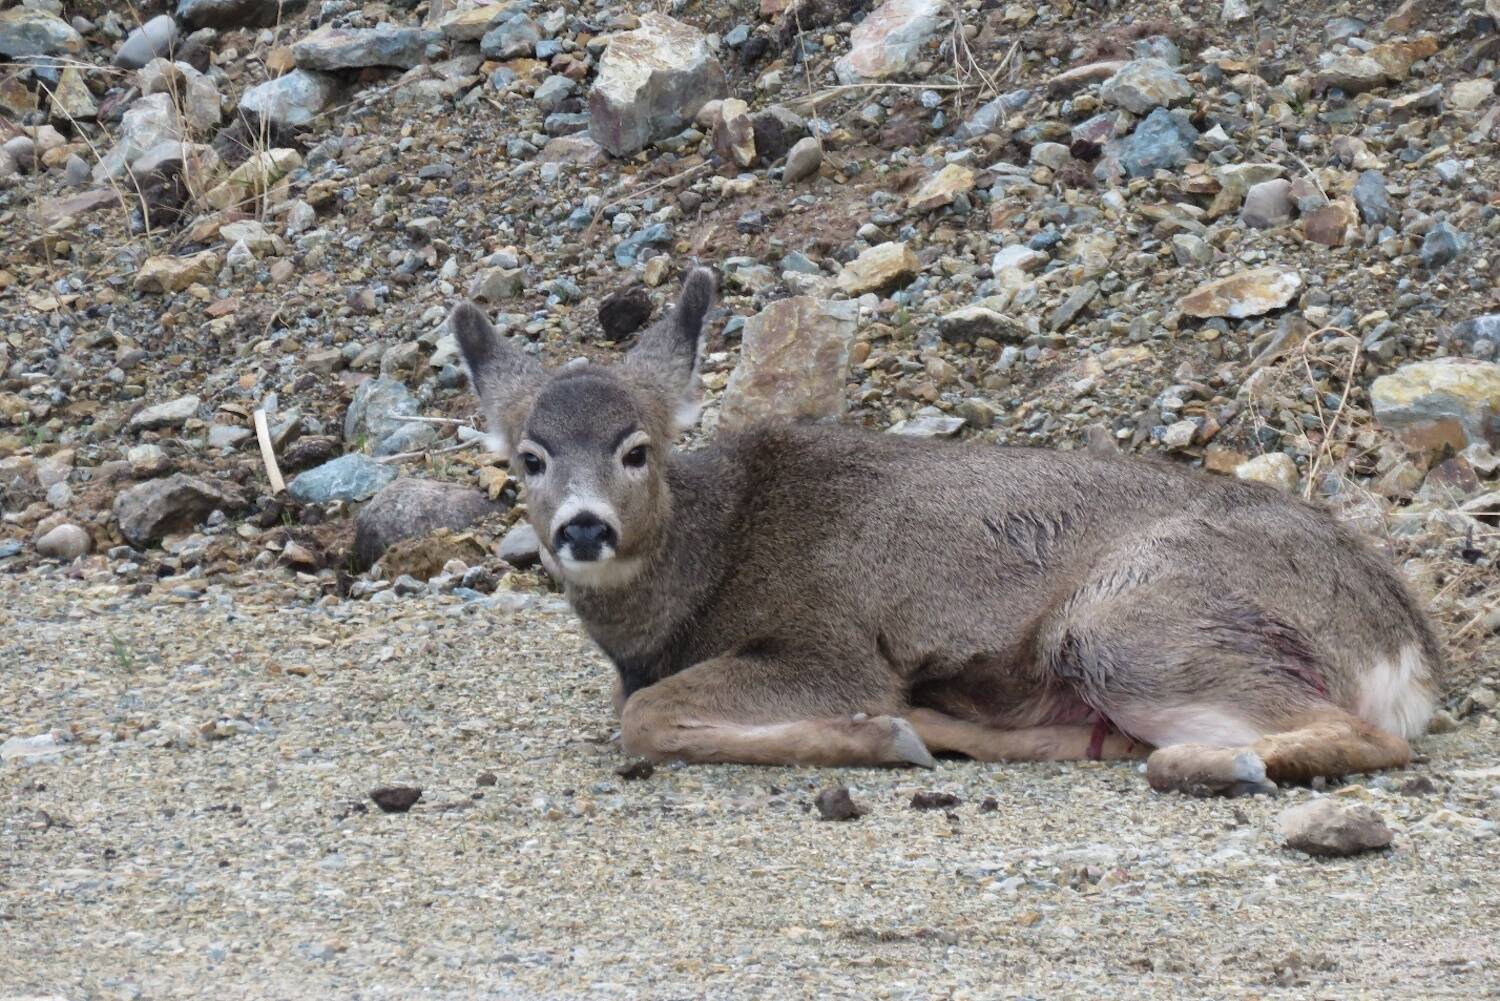 The fawn mule deer that was injured by an unleashed dog in Kuiper’s Peak Mountain Park on Nov. 7. (Contributed)